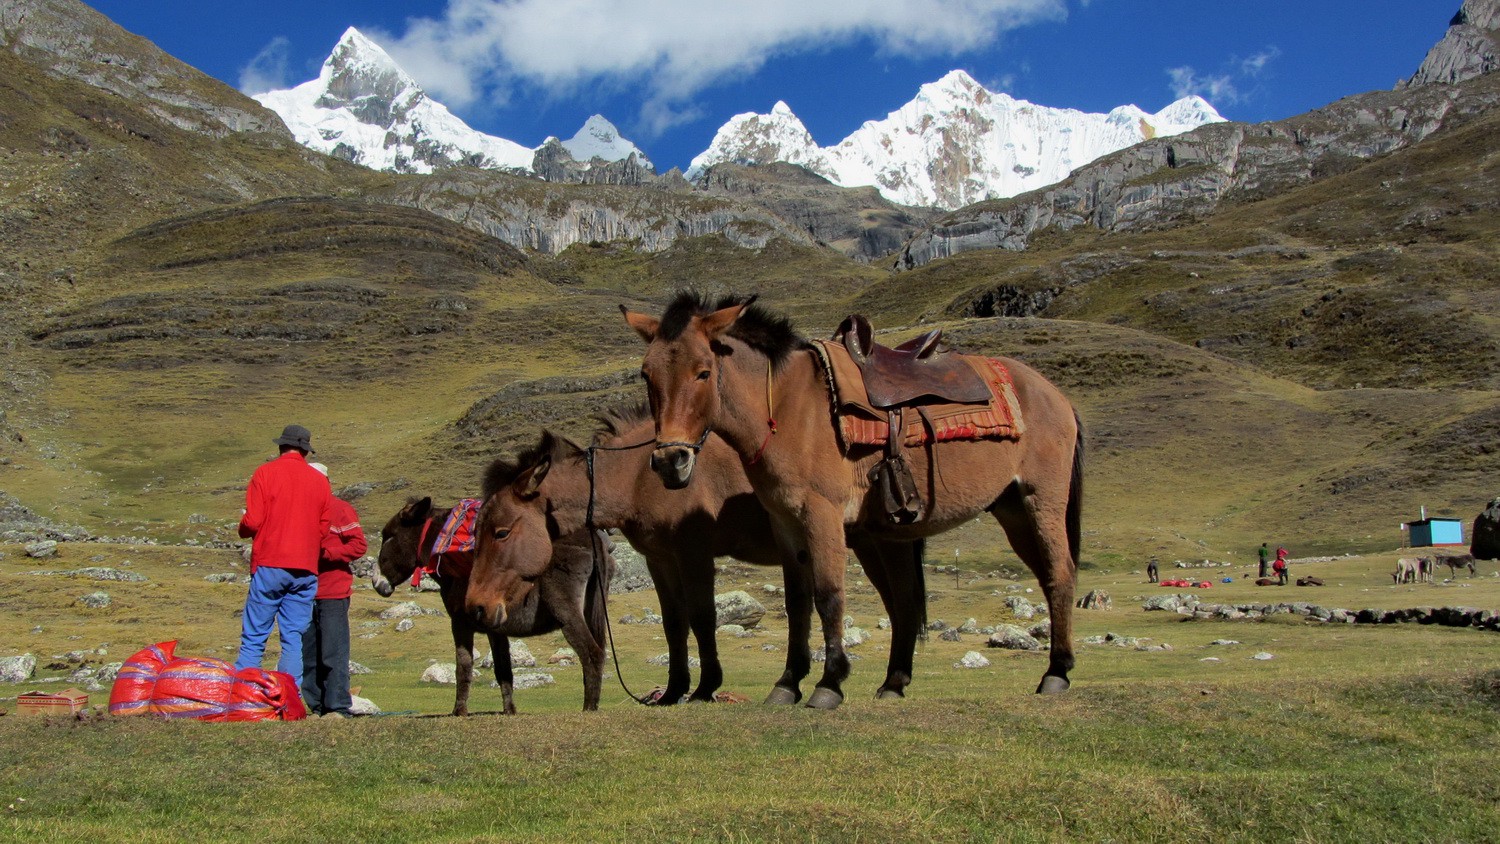 Our donkey Teodoro and two mules Teja and Rambo in the Huayhuash camp with 5653 meters high Nevado Trapecio on the left